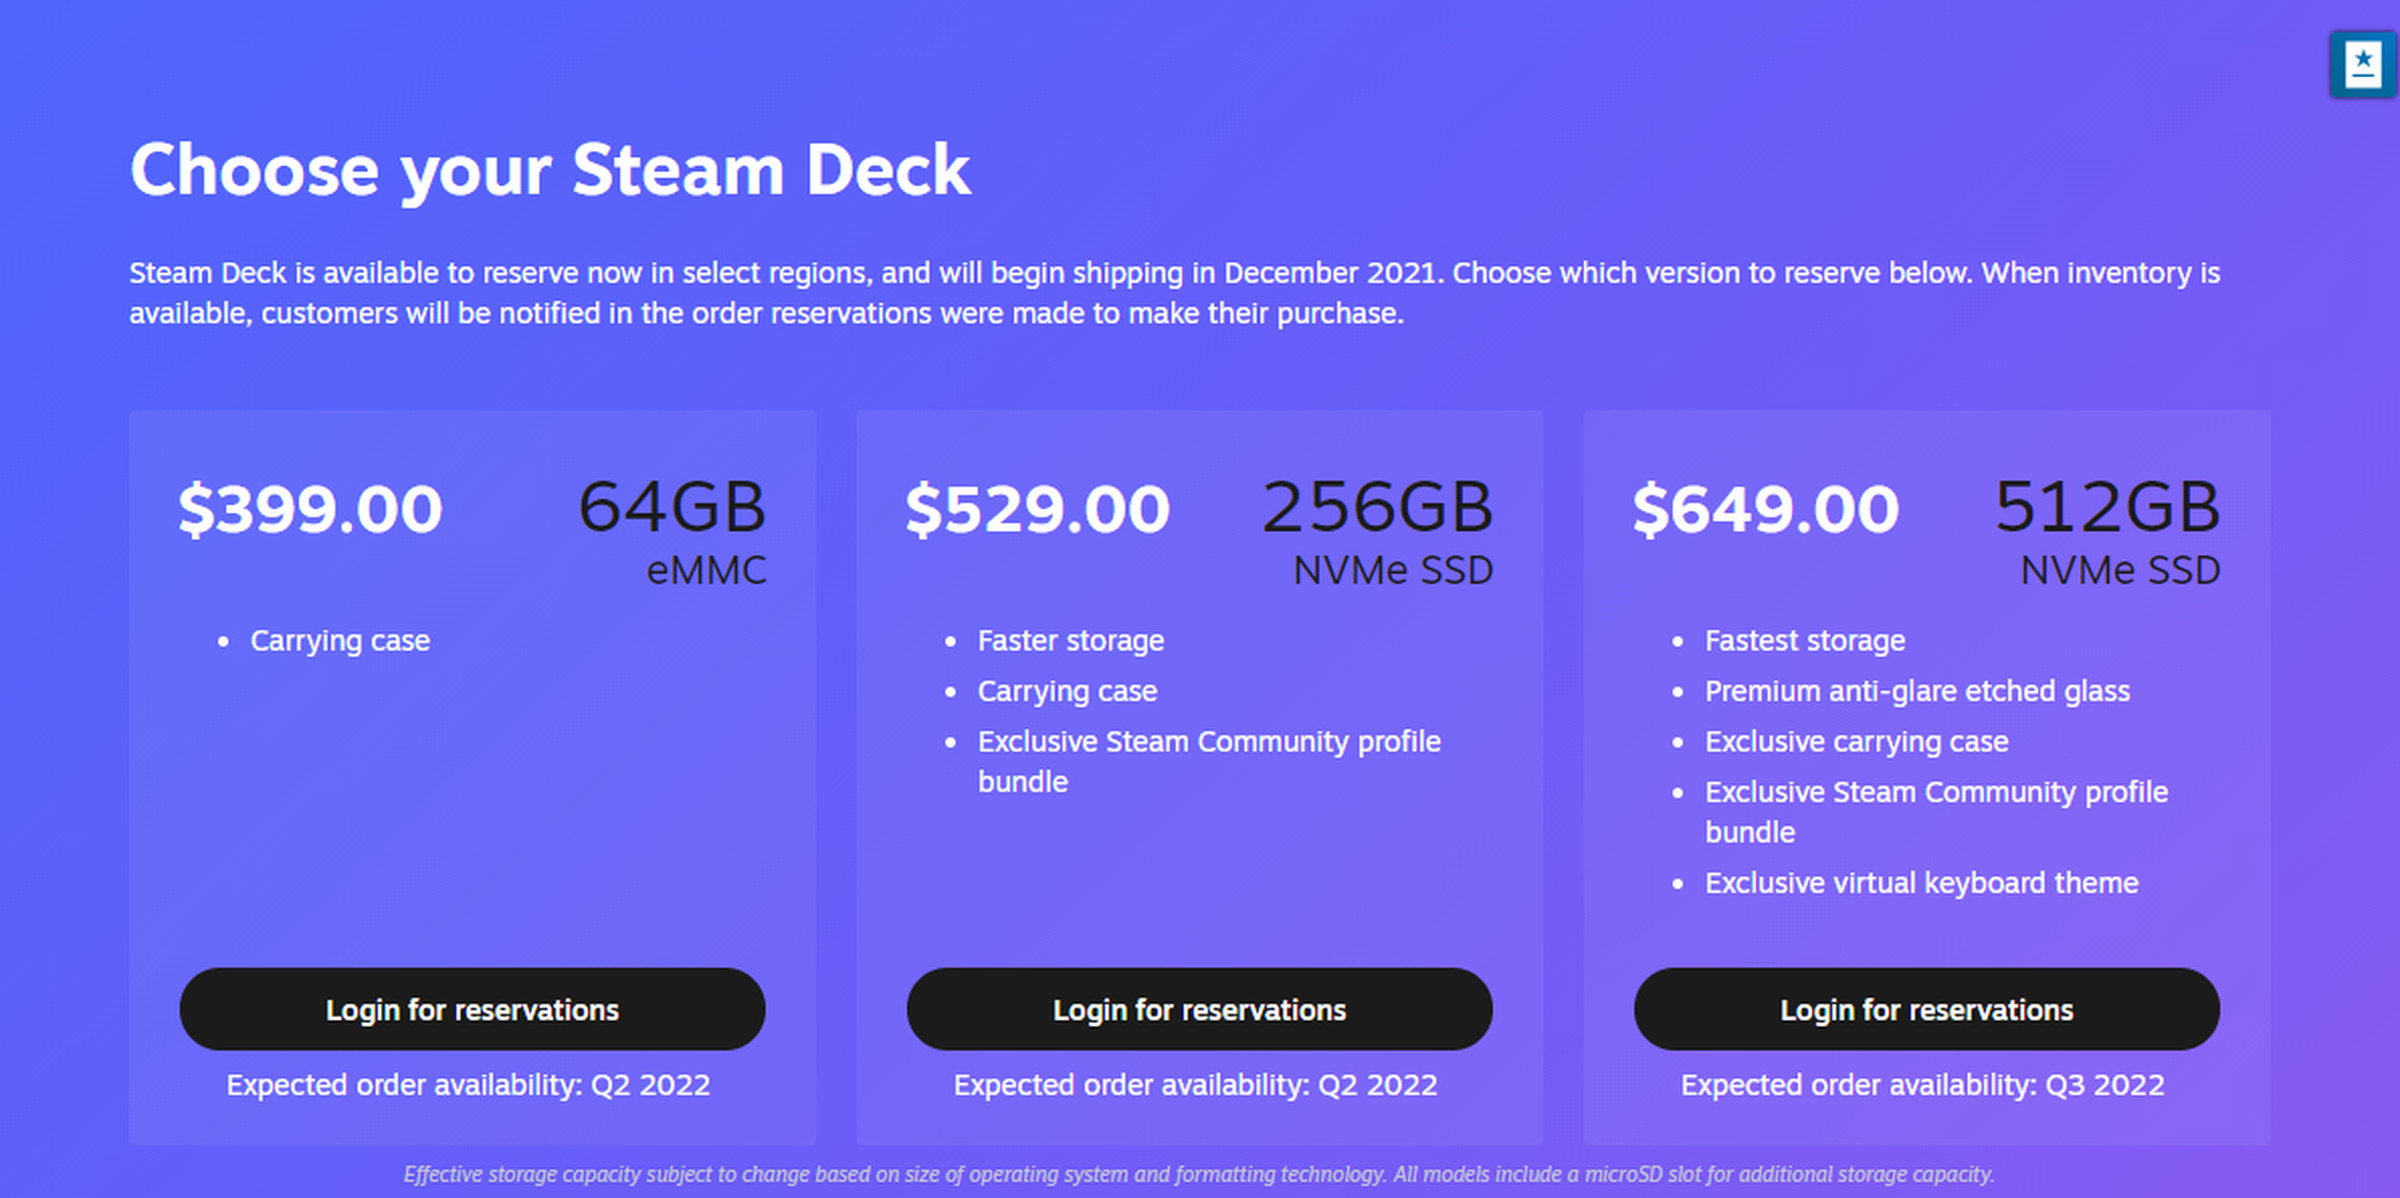 As of July 18th, the wait time for the top-of-the-line Steam Deck is Q3 of 2022. 